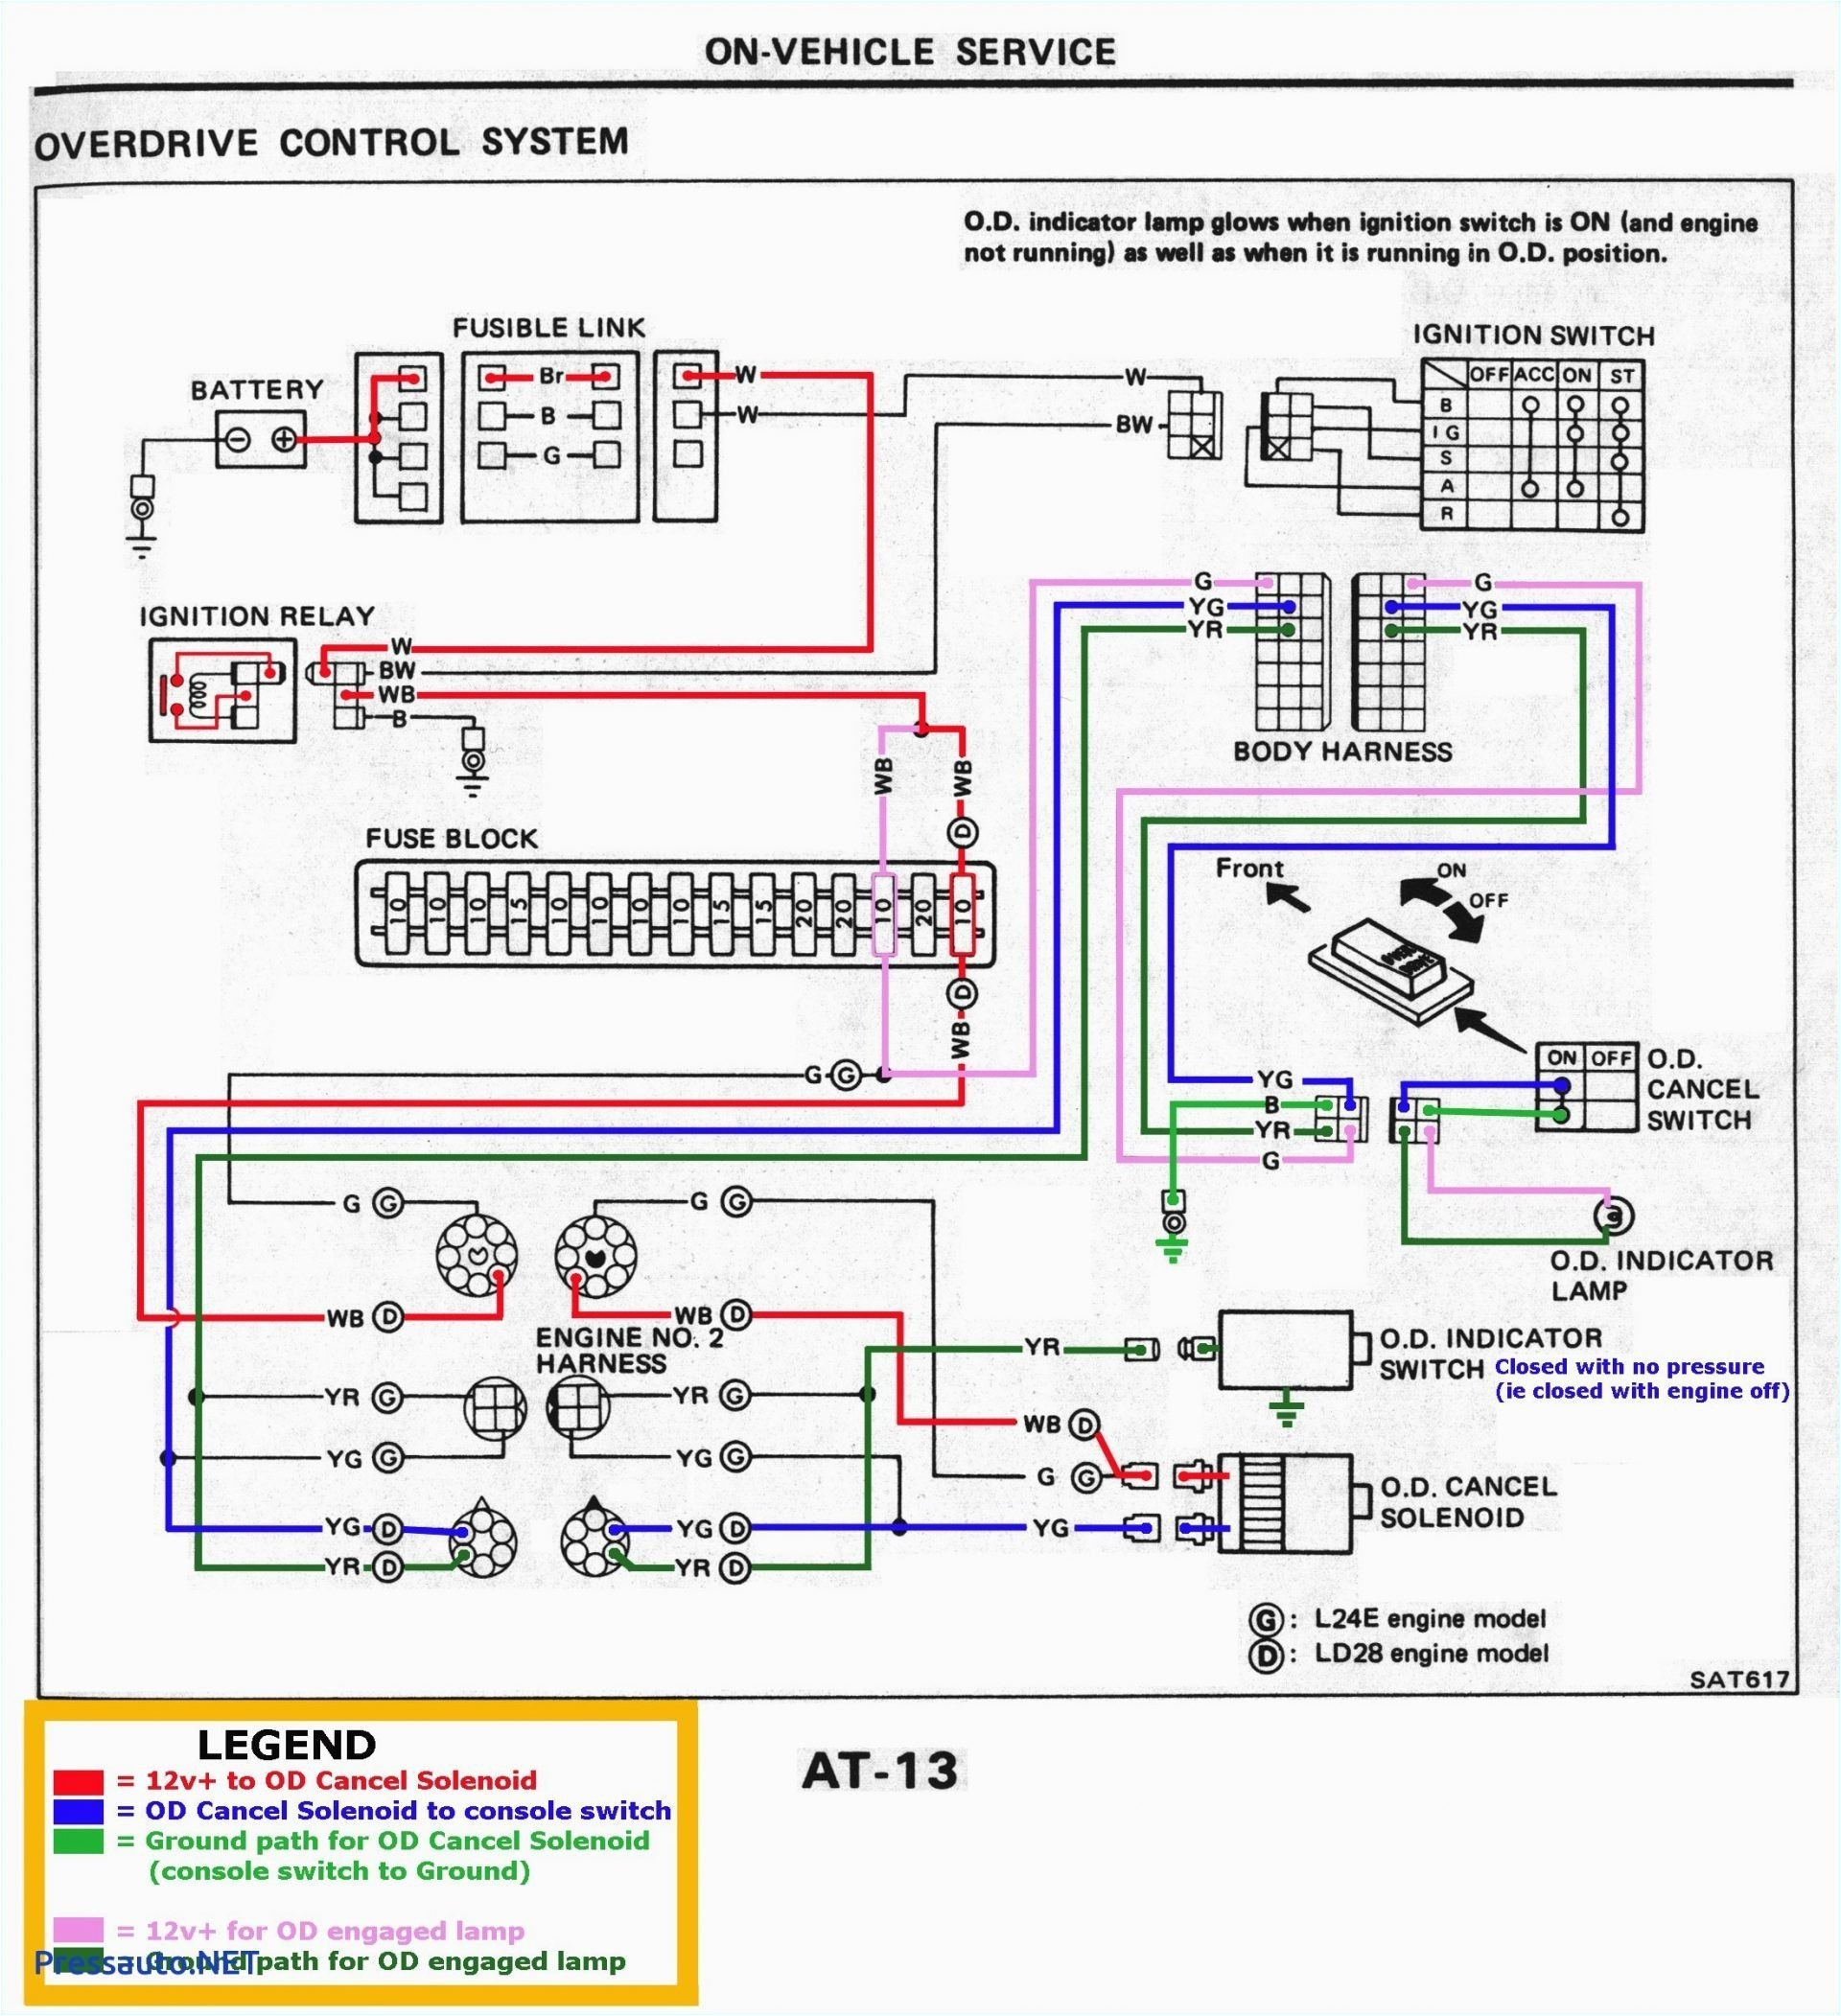 wiring diagram in addition wiring led lights in series also vw light how to wire speakers diagram in addition jeep headlight switch wiring